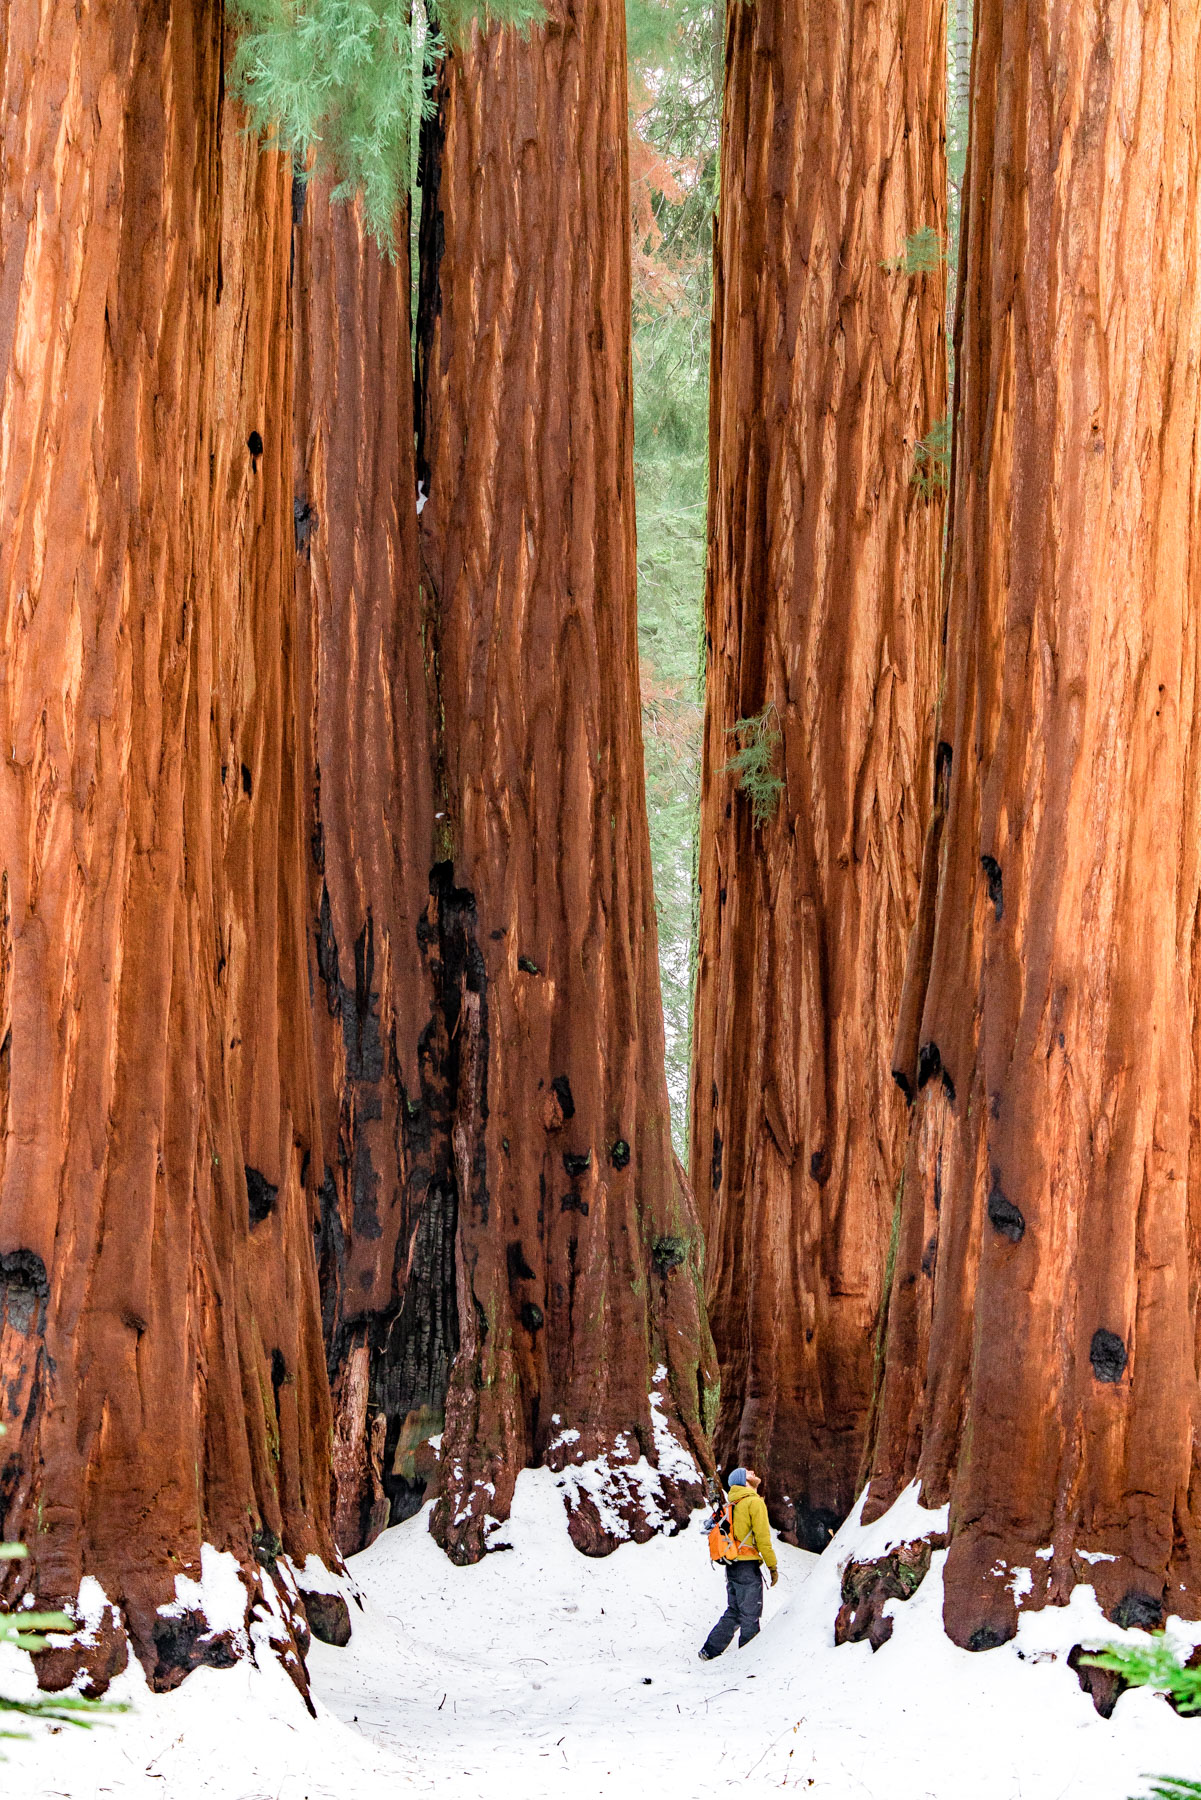 Sequoia & Kings Canyon Facts include Sequoia trees which are among the largest in the world.